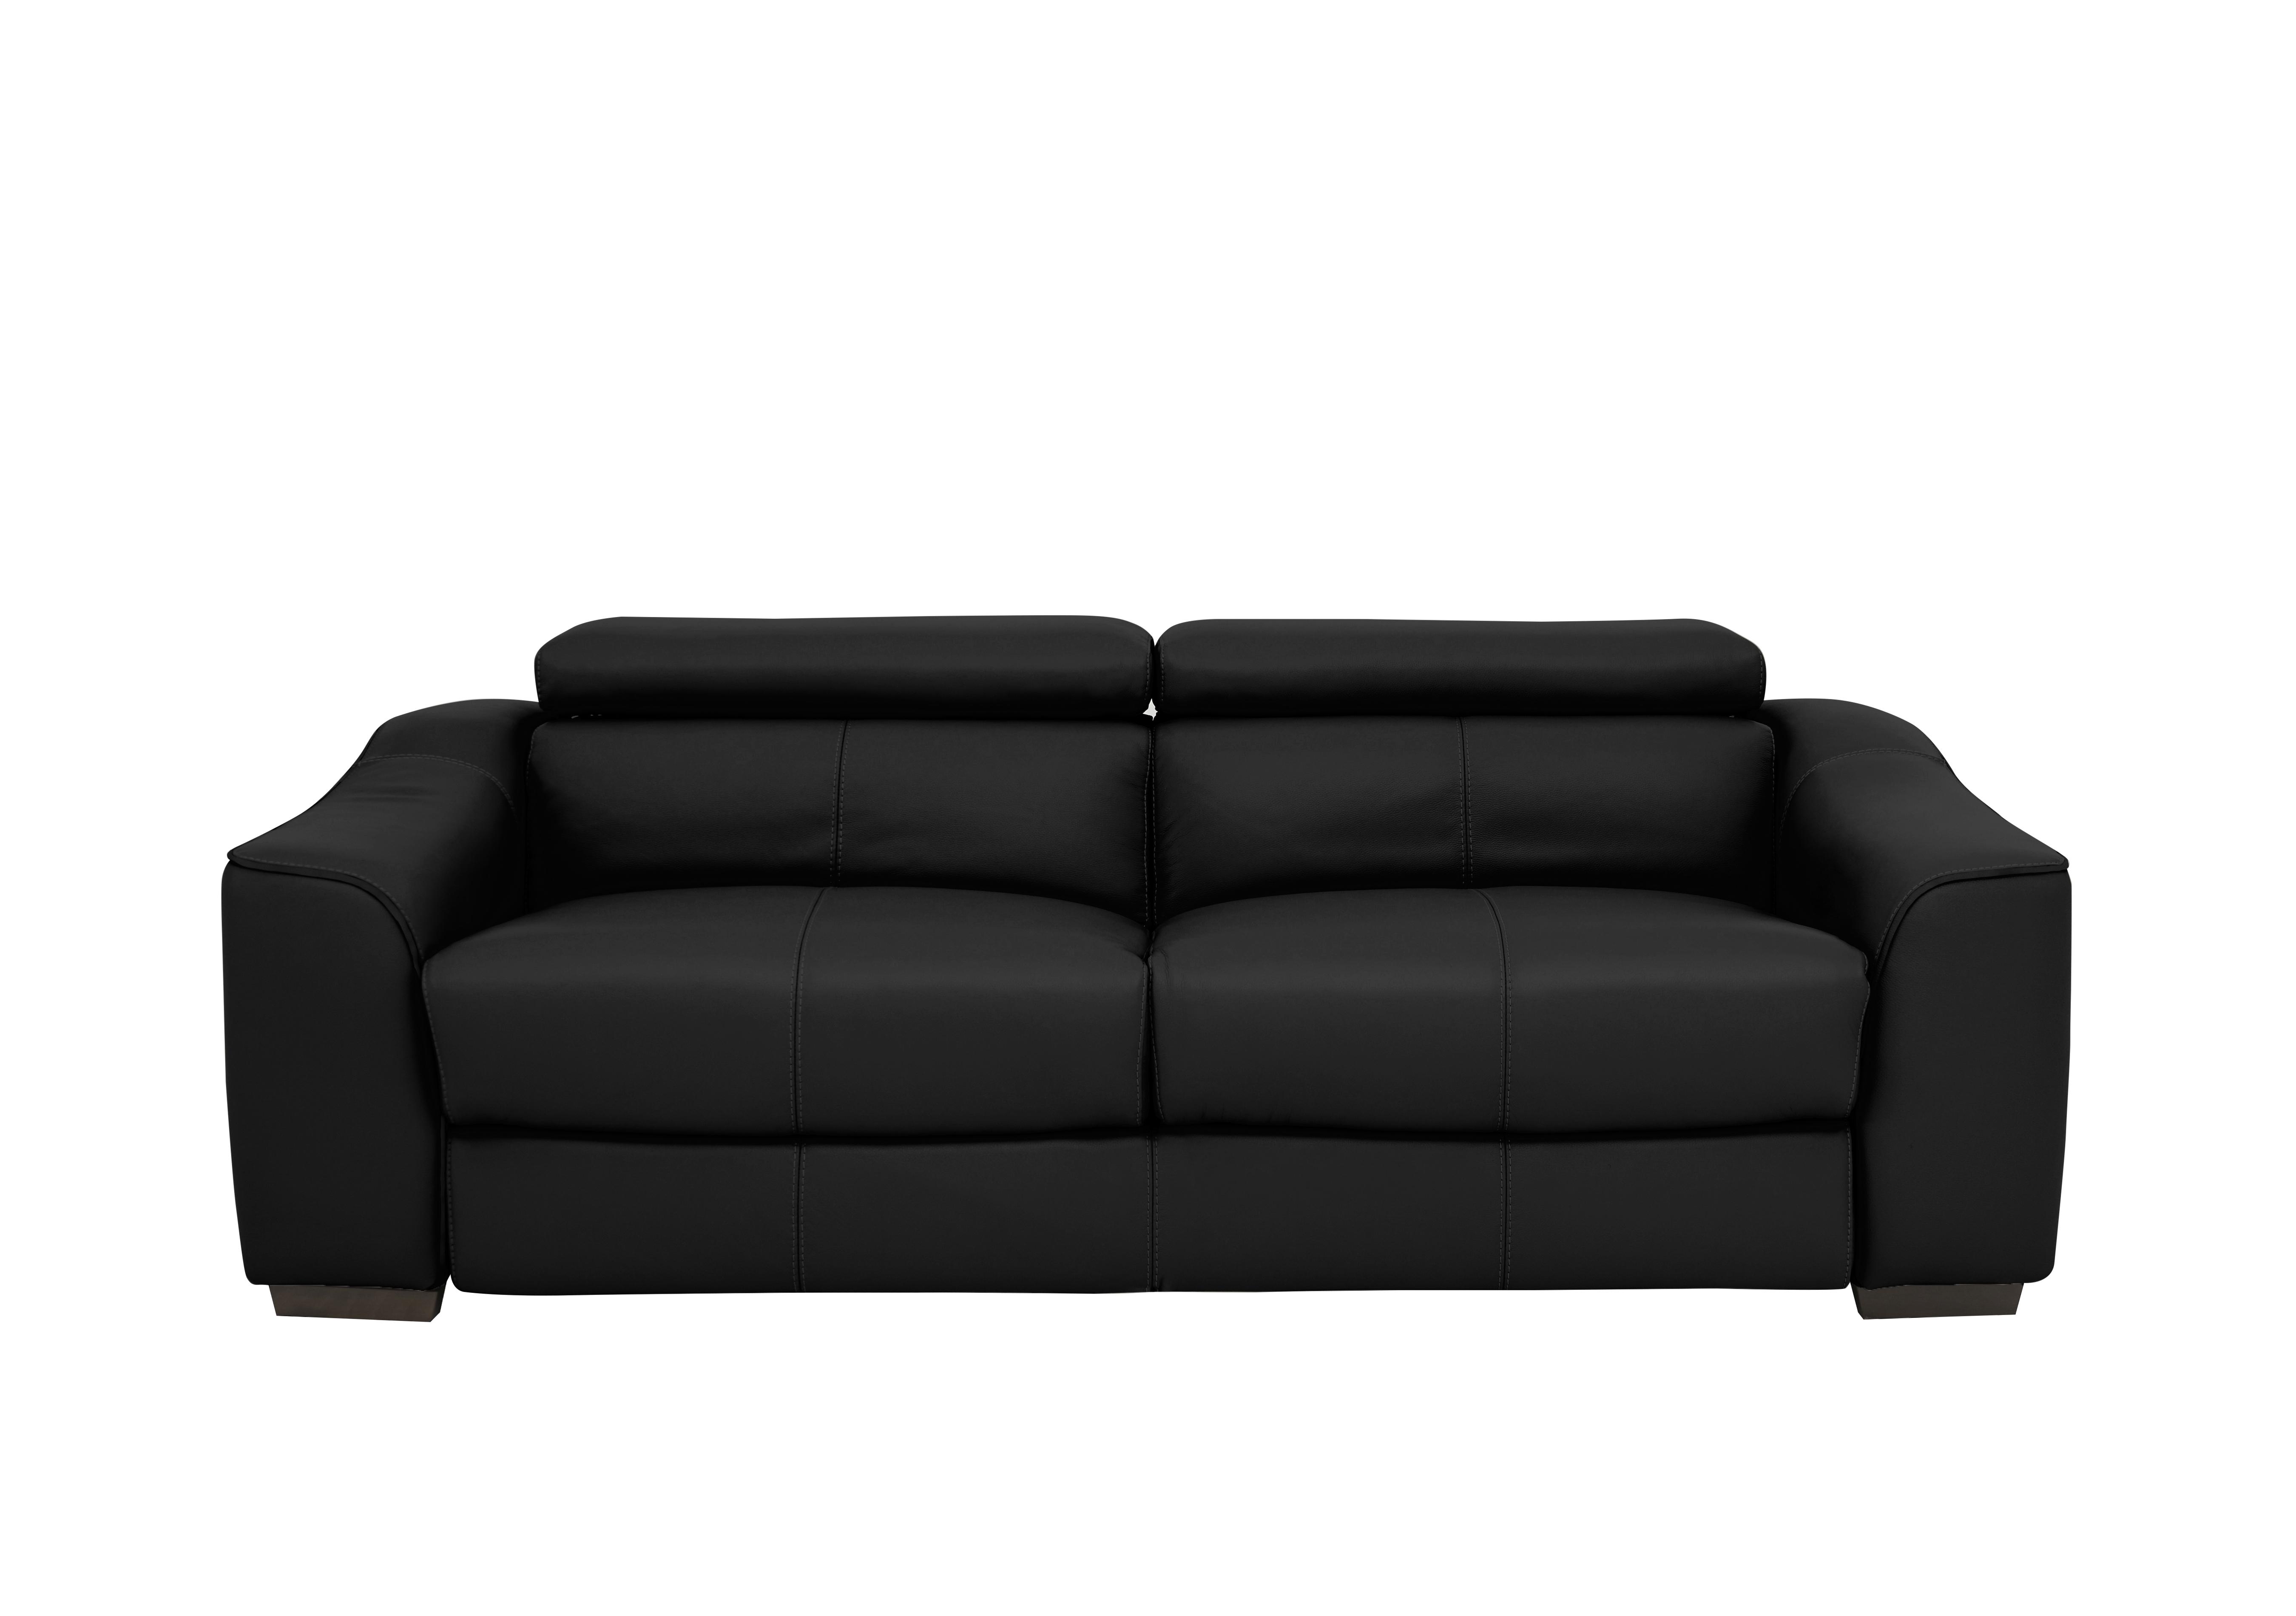 Elixir 3 Seater Leather Sofa Bed in Bv-3500 Classic Black on Furniture Village